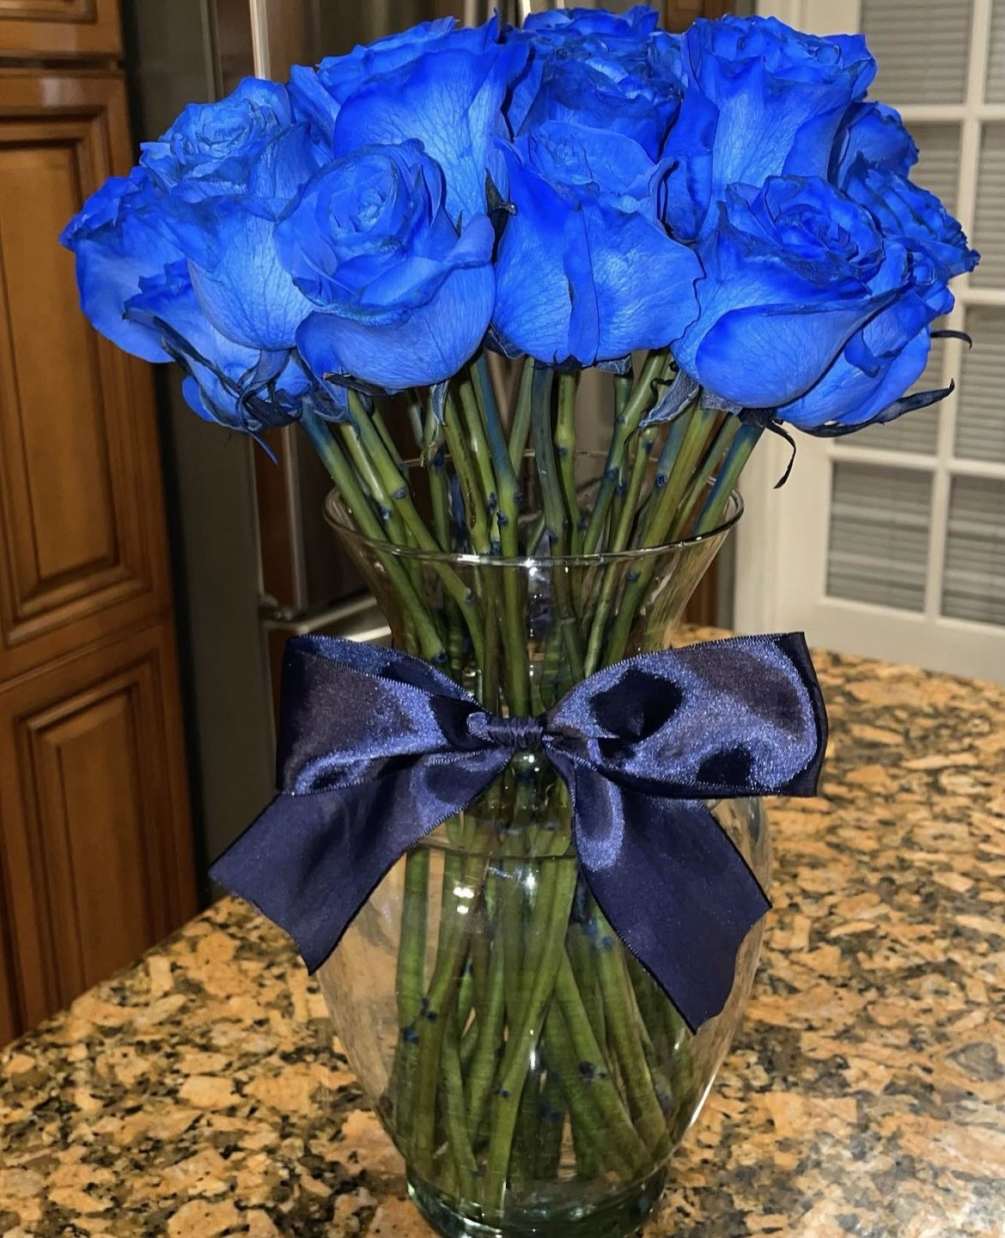 A dozen of Blue Roses  arranged in a beautiful clear glass